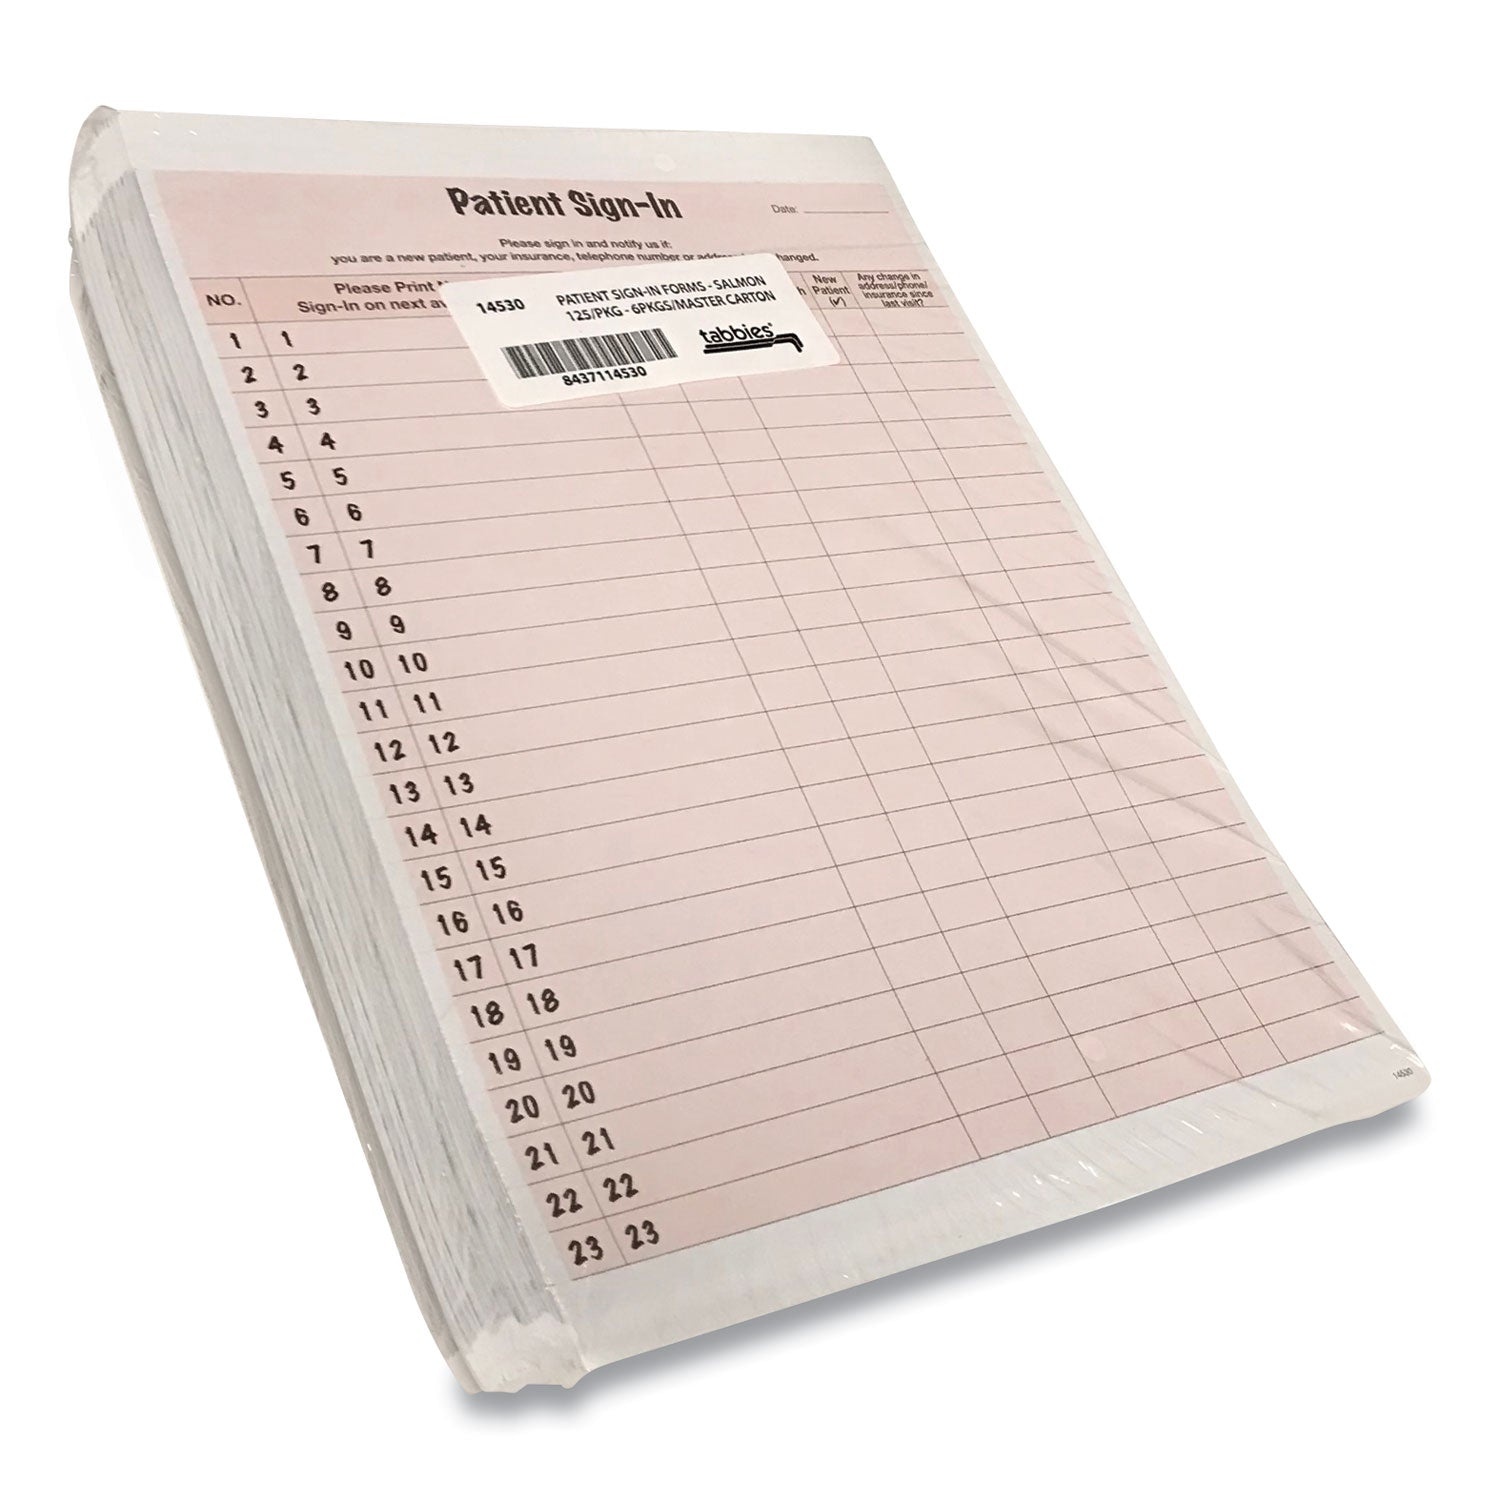 Patient Sign-In Label Forms, Two-Part Carbon, 8.5 x 11.63, Salmon Sheets, 125 Forms Total - 